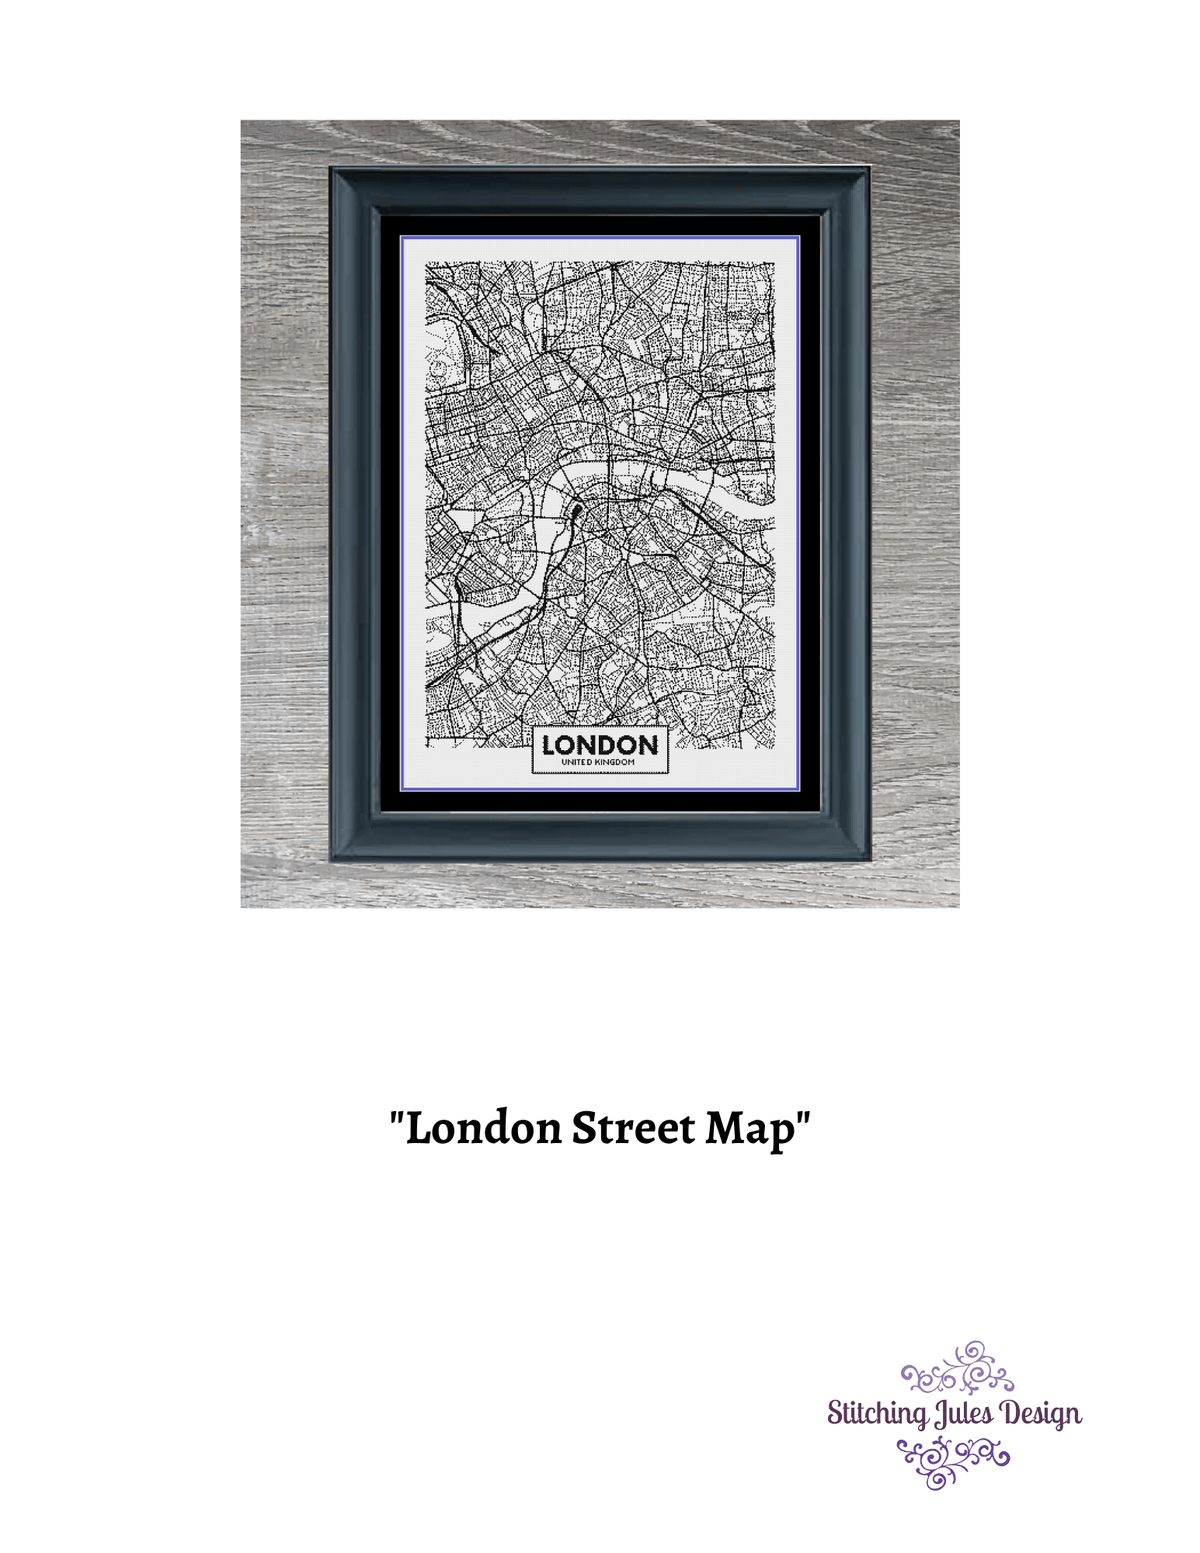 Stitching Jules Design Cross Stitch Pattern London City Map Cross Stitch Pattern | London Street Map | Blackwork | Instant PDF Download And Physical Pattern Options